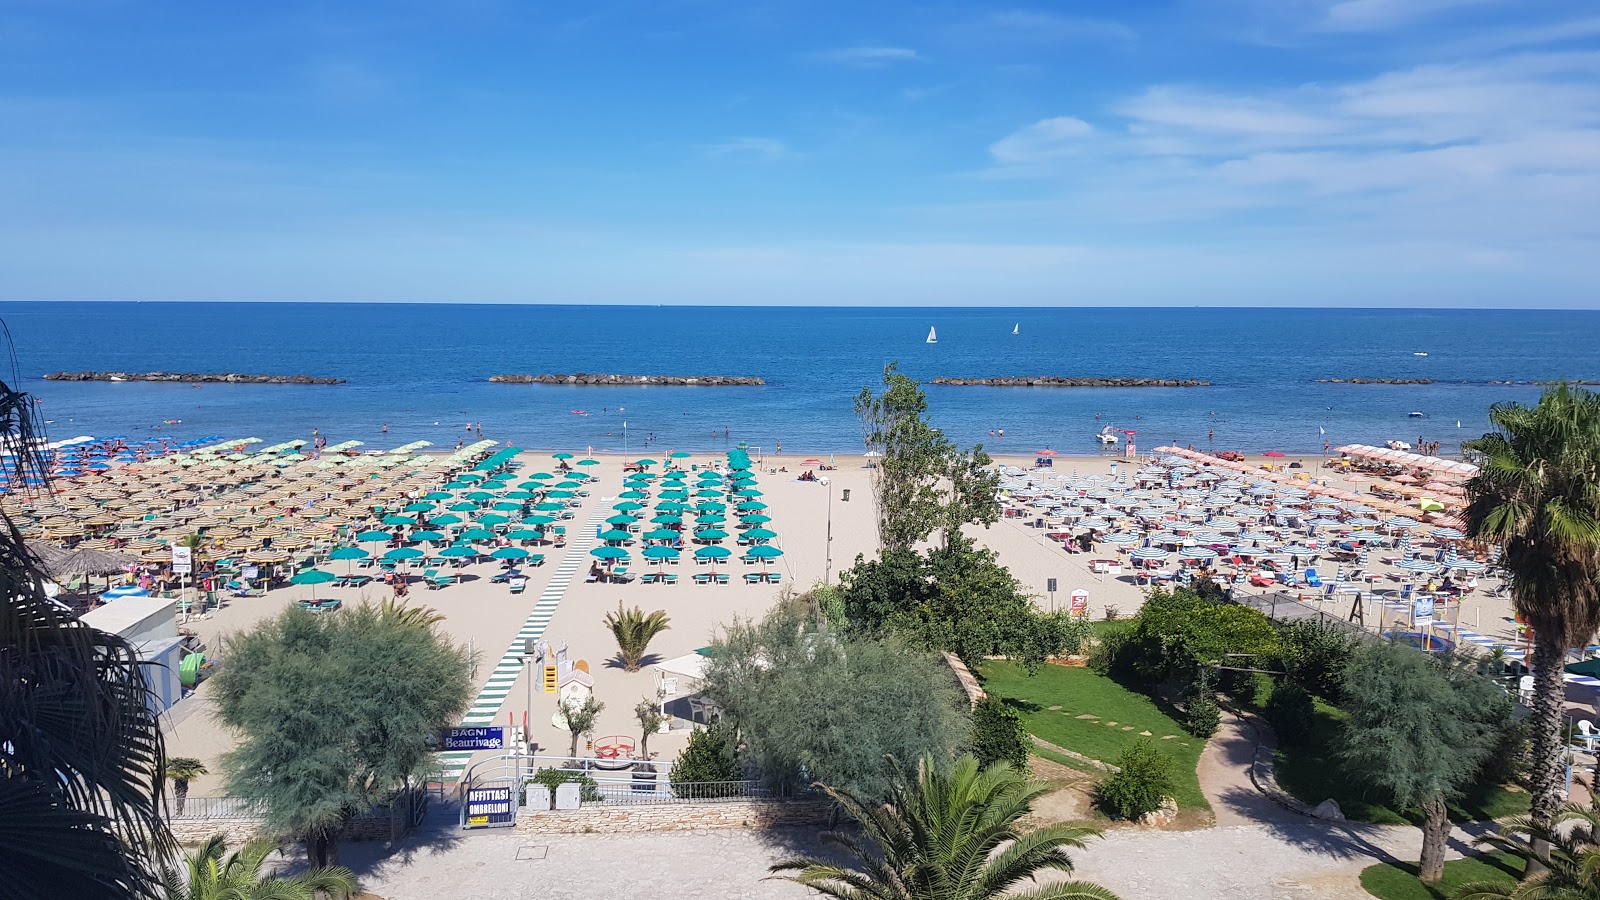 Photo of Spiaggia Campo Europa with very clean level of cleanliness